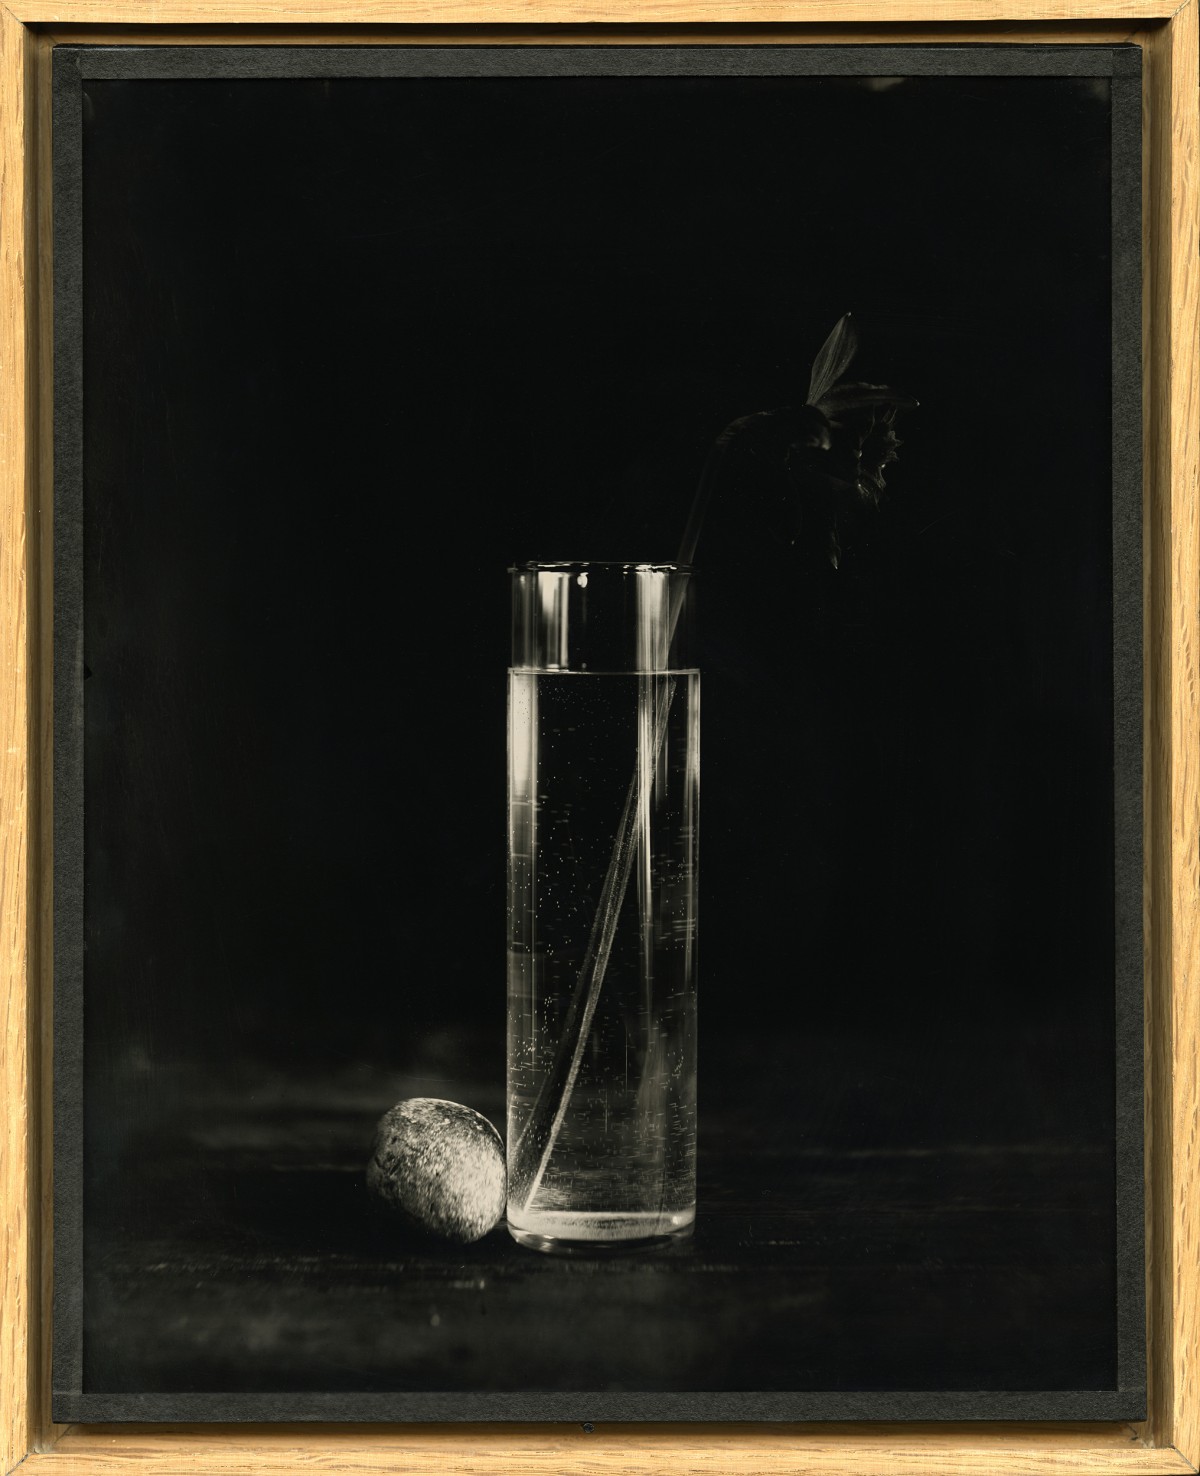 Éric Antoine photo Drowning Flowers Drowning Flowers XII Recto 2021